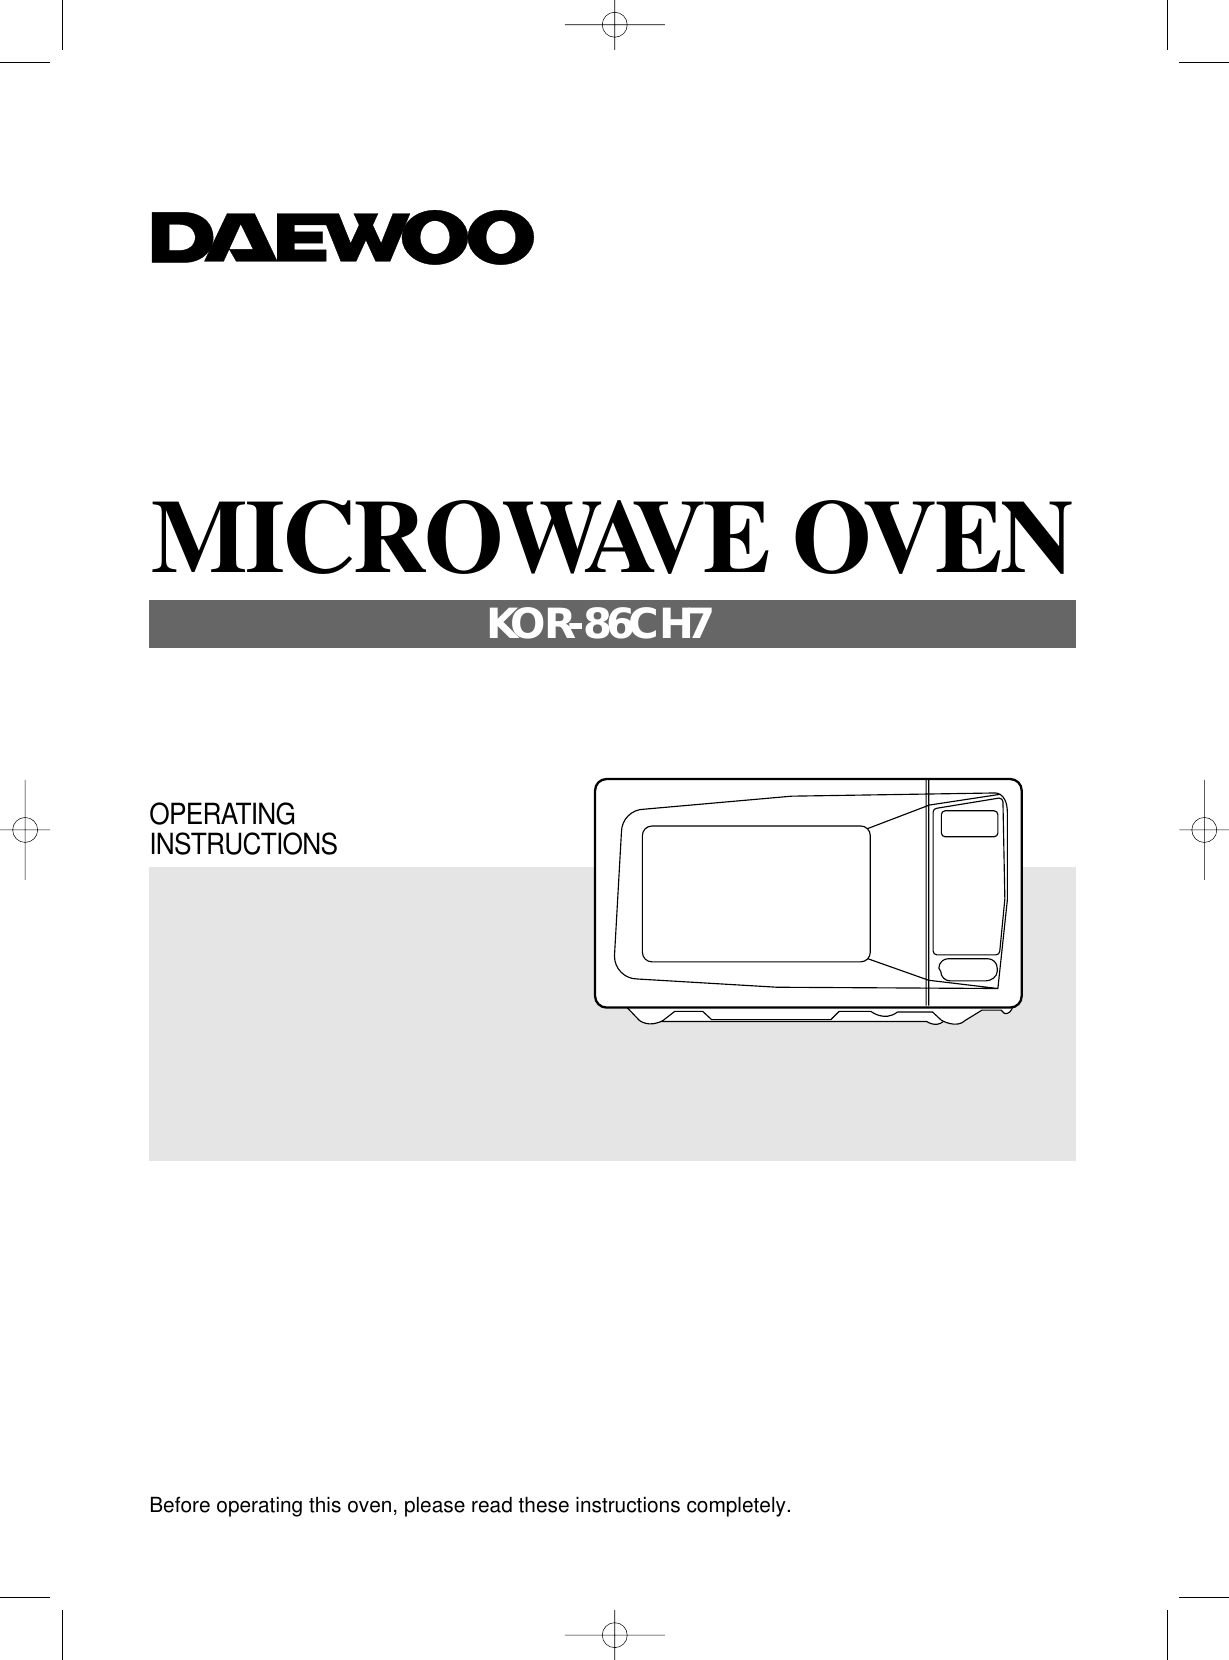 Before operating this oven, please read these instructions completely.OPERATINGINSTRUCTIONSMICROWAVE OVENKOR-86CH7